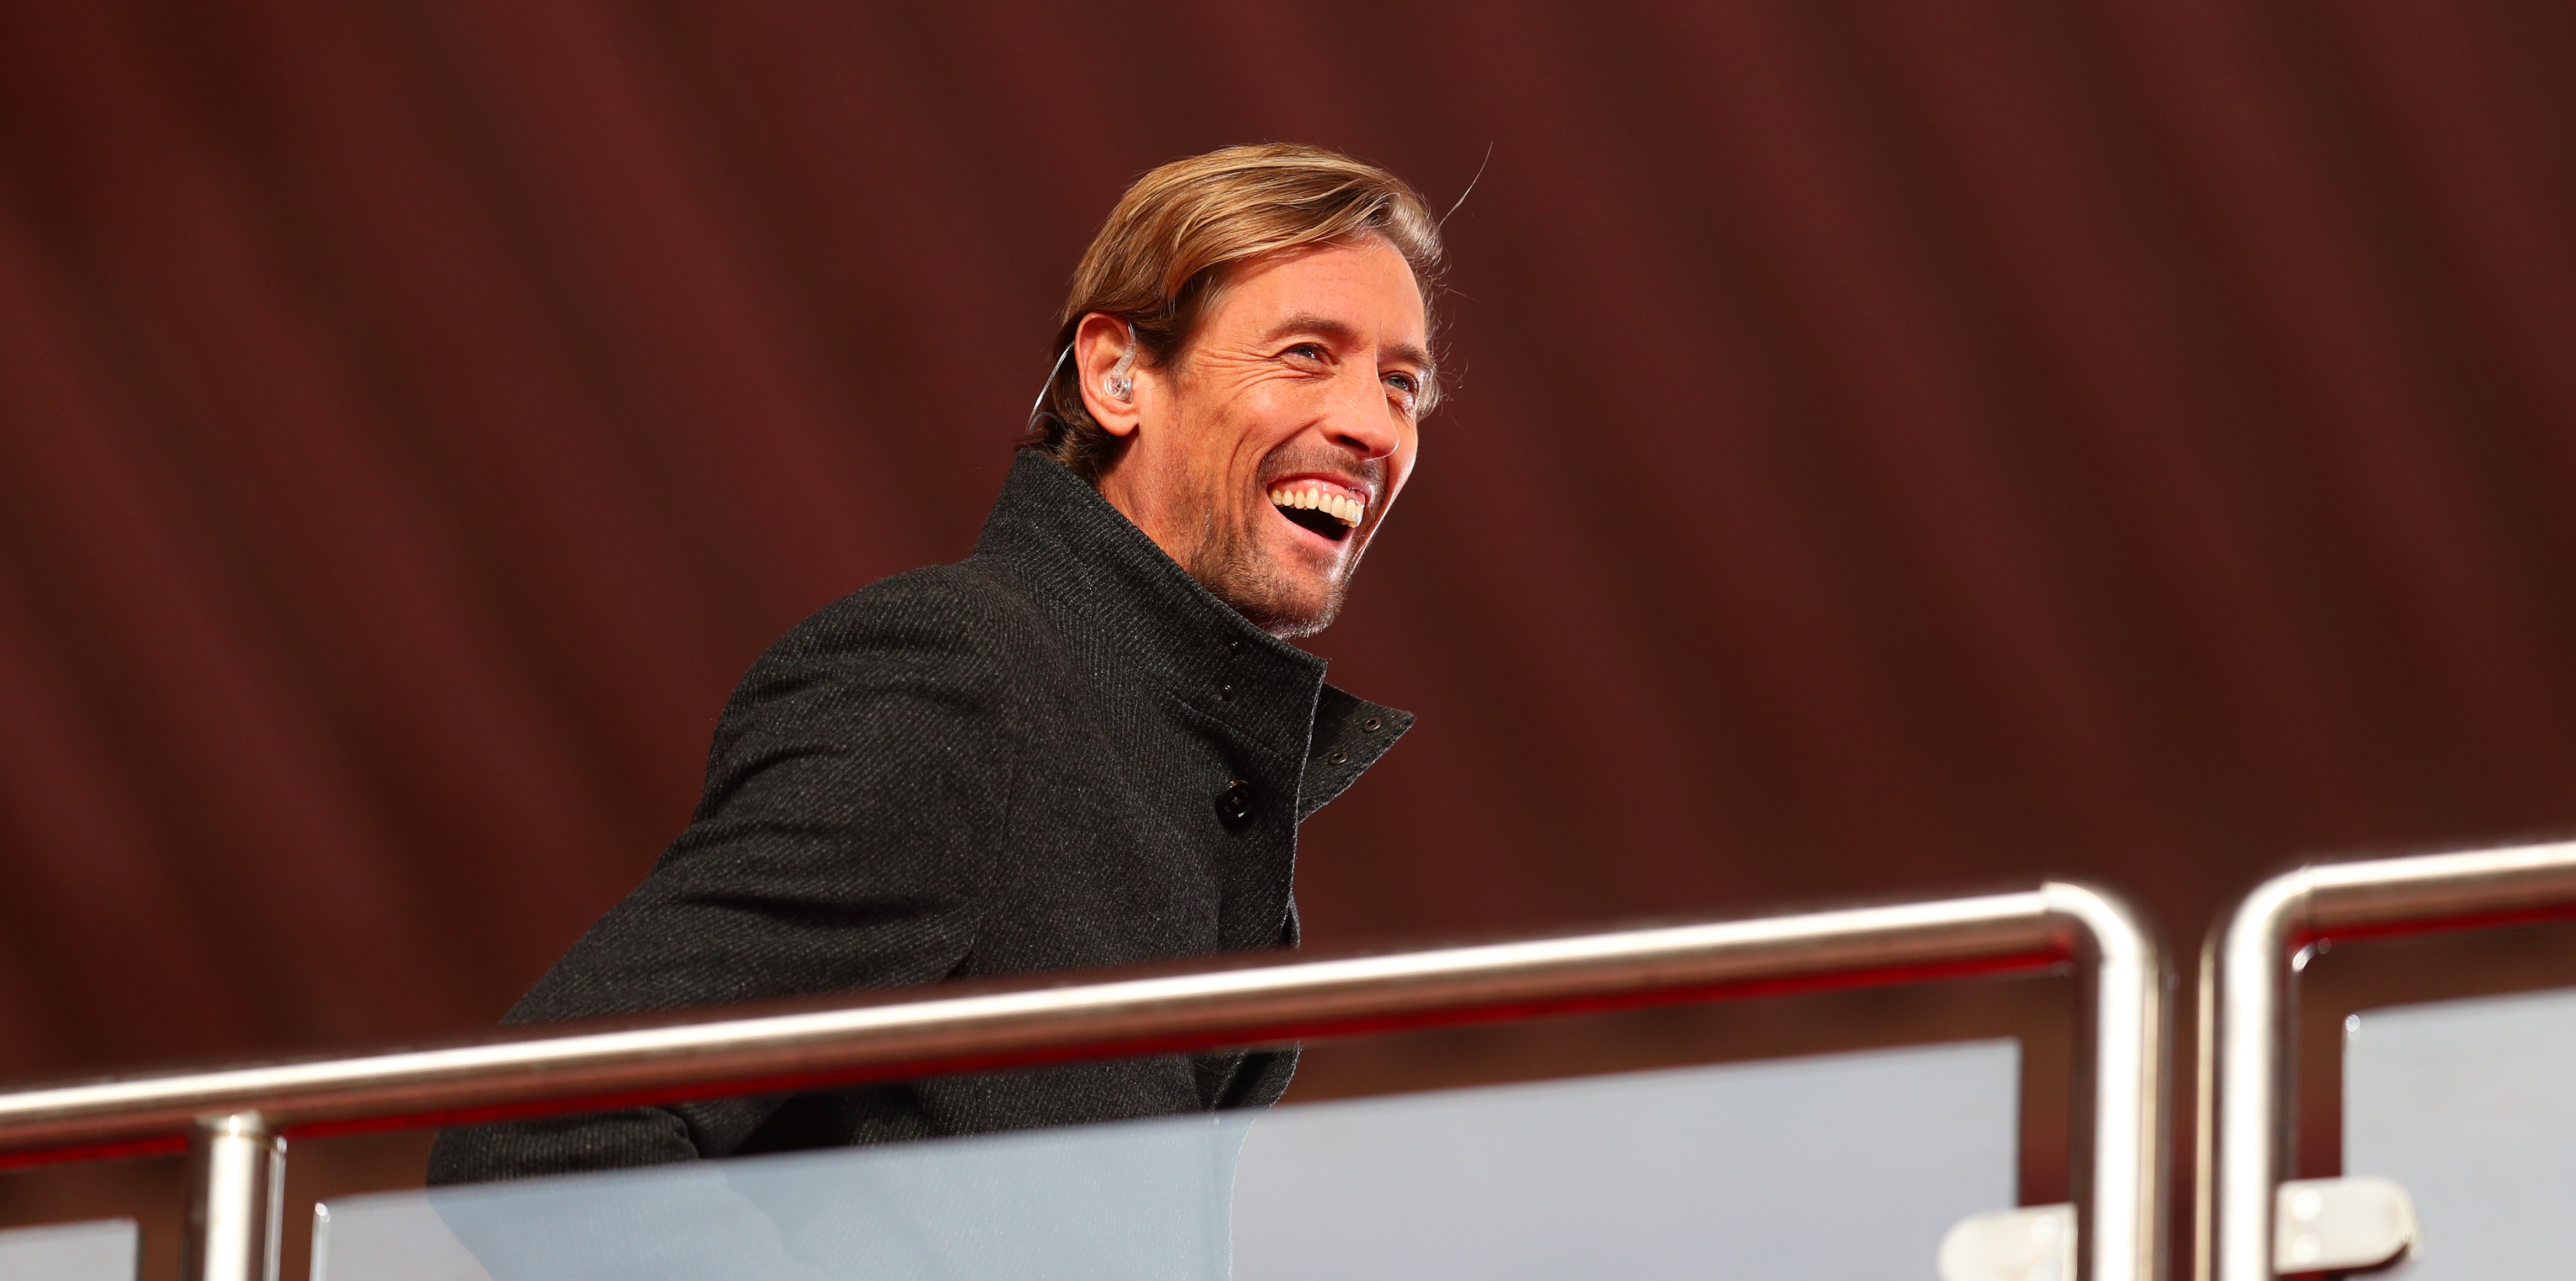 Peter Crouch’s six-word tweet response to Klopp’s Christmas message perfectly sums things up